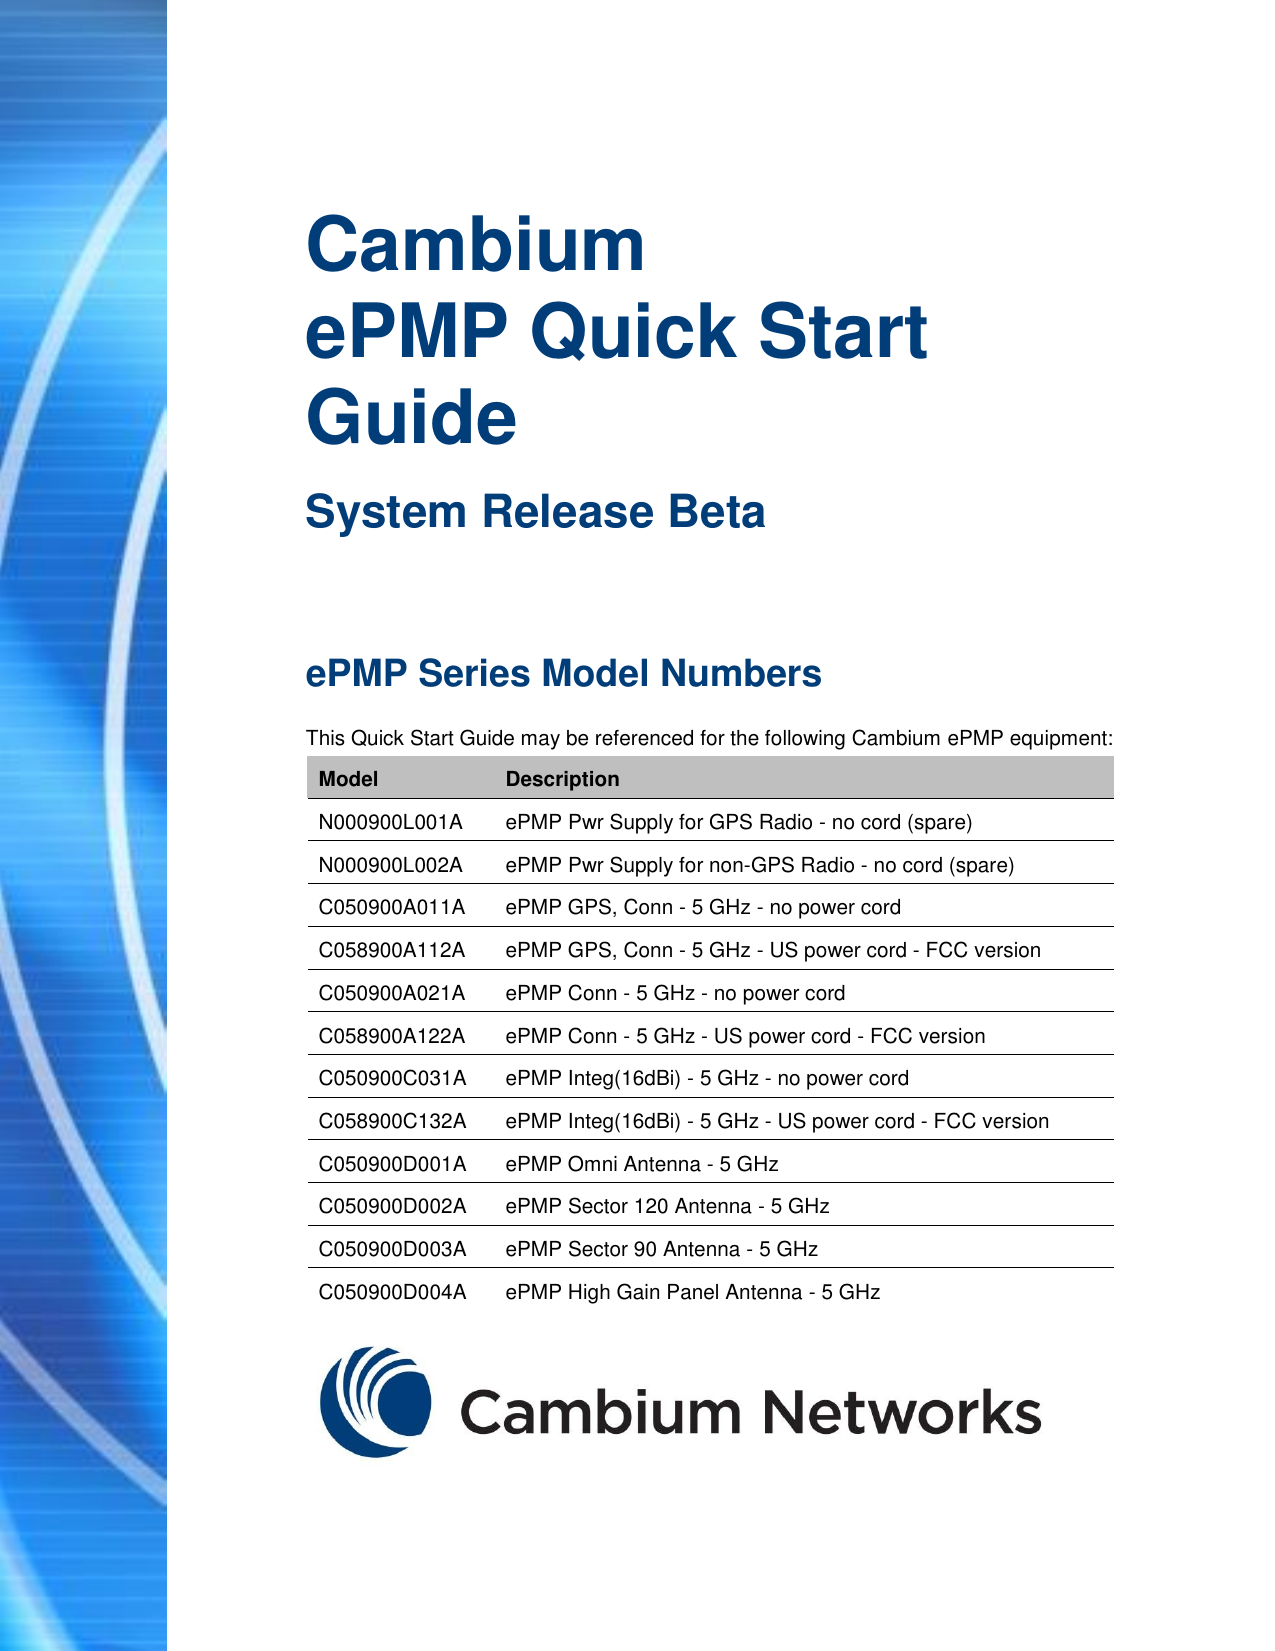   Cambium ePMP Quick Start Guide System Release Beta ePMP Series Model Numbers This Quick Start Guide may be referenced for the following Cambium ePMP equipment: Model Description N000900L001A ePMP Pwr Supply for GPS Radio - no cord (spare) N000900L002A ePMP Pwr Supply for non-GPS Radio - no cord (spare) C050900A011A ePMP GPS, Conn - 5 GHz - no power cord C058900A112A ePMP GPS, Conn - 5 GHz - US power cord - FCC version C050900A021A ePMP Conn - 5 GHz - no power cord C058900A122A ePMP Conn - 5 GHz - US power cord - FCC version C050900C031A ePMP Integ(16dBi) - 5 GHz - no power cord C058900C132A ePMP Integ(16dBi) - 5 GHz - US power cord - FCC version C050900D001A ePMP Omni Antenna - 5 GHz C050900D002A ePMP Sector 120 Antenna - 5 GHz C050900D003A ePMP Sector 90 Antenna - 5 GHz C050900D004A ePMP High Gain Panel Antenna - 5 GHz  